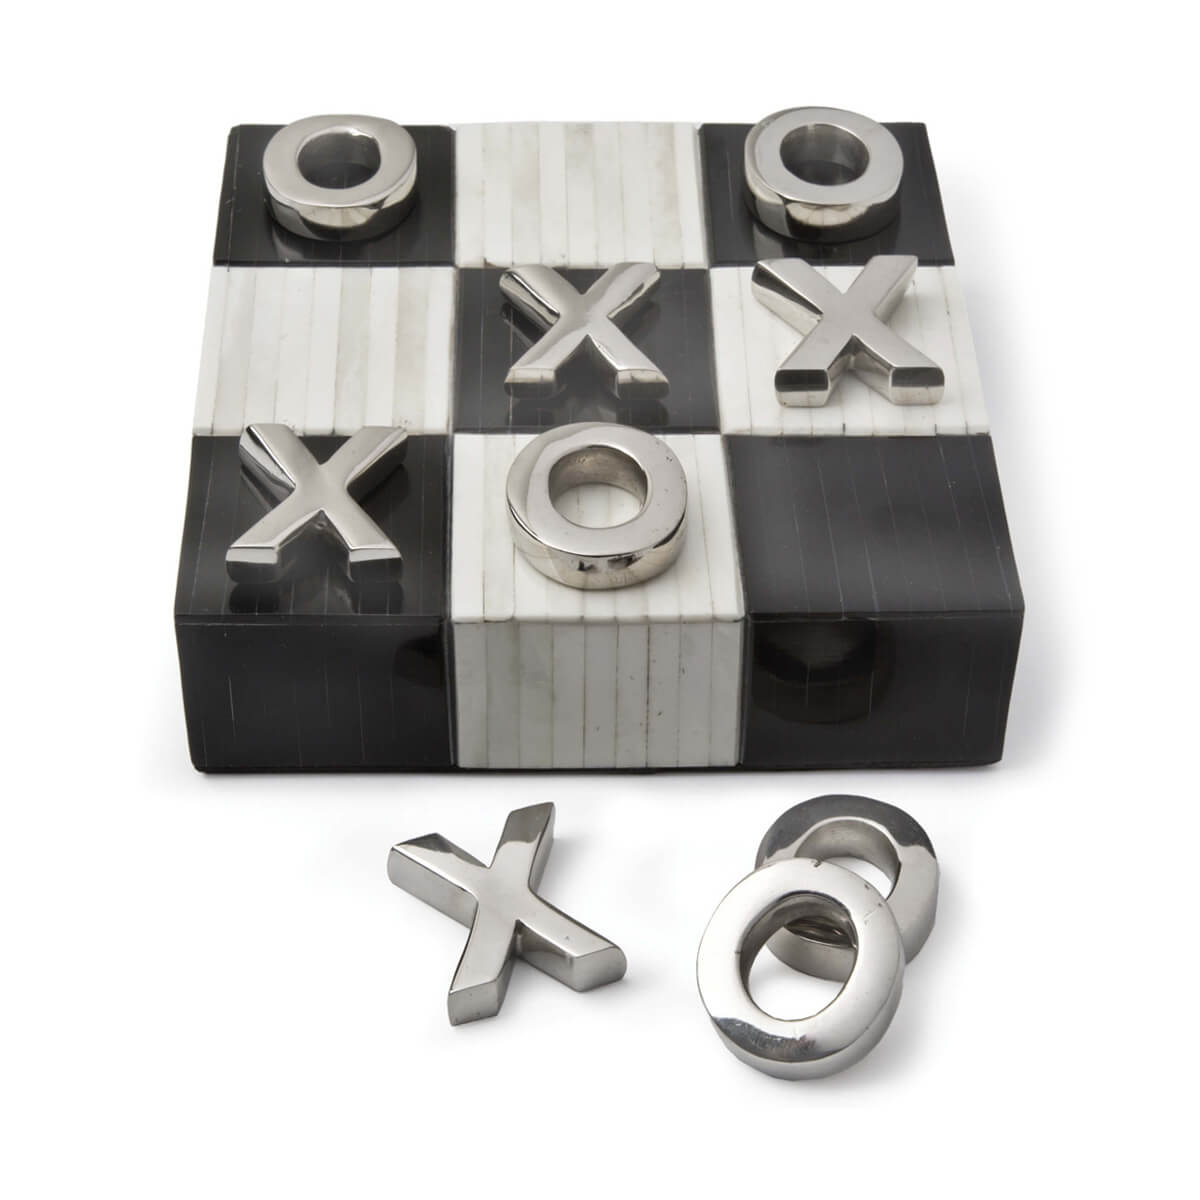 Tic Tac Toe Flat Board With Nickel Pieces by Regina Andrew